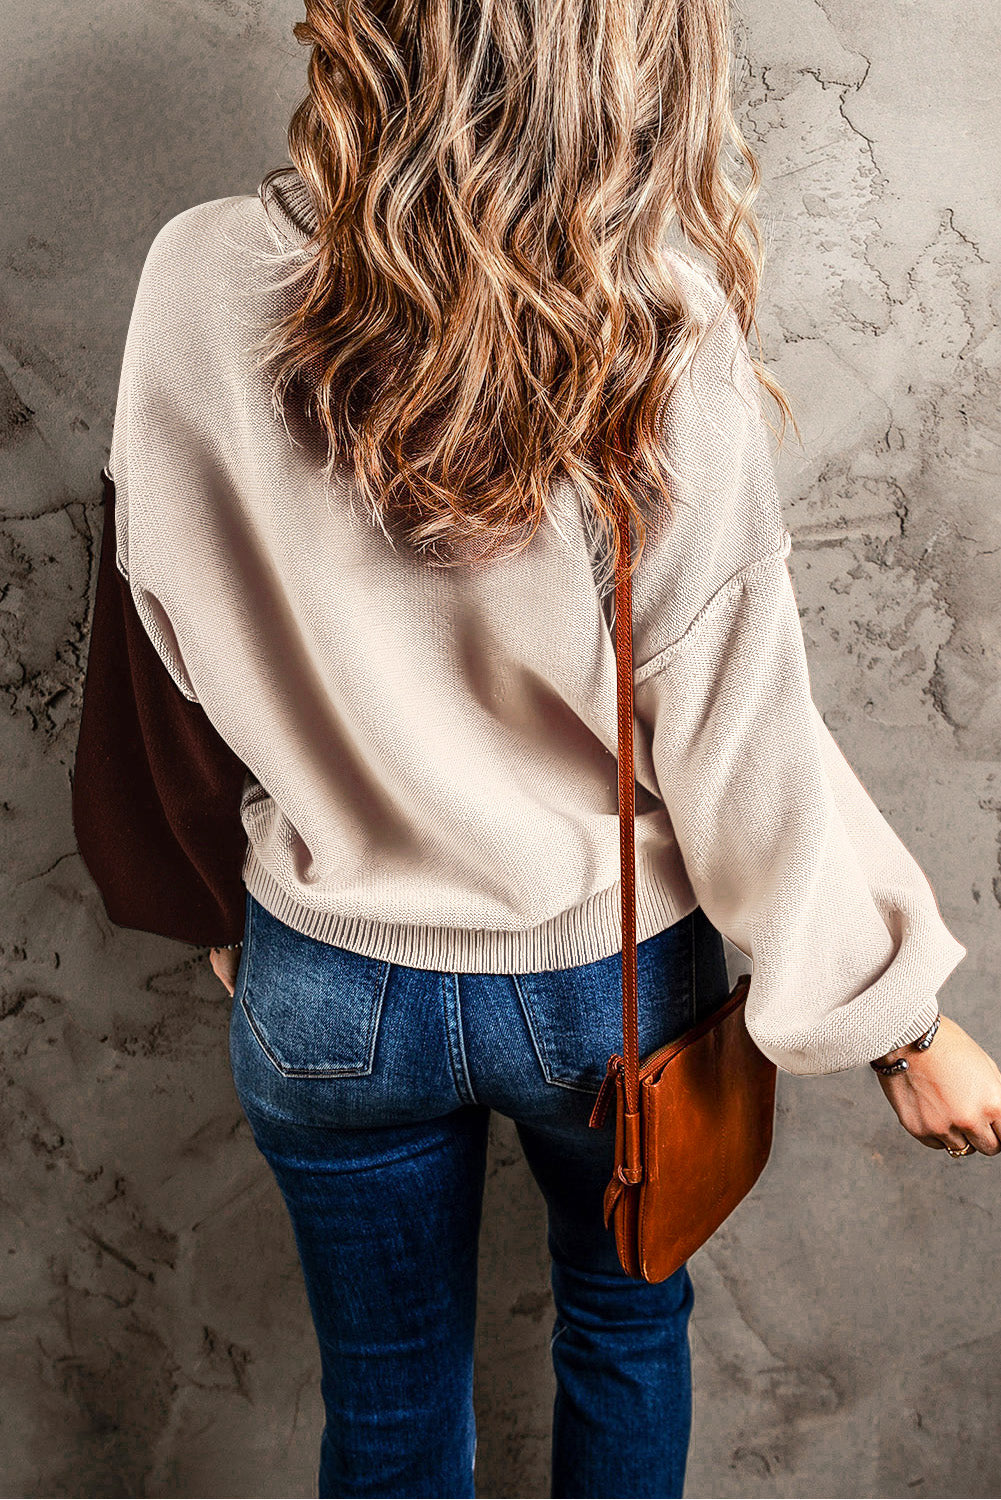 Chicory Coffee Contrast Color Exposed Seam Drop Shoulder Sweater Sweaters & Cardigans JT's Designer Fashion